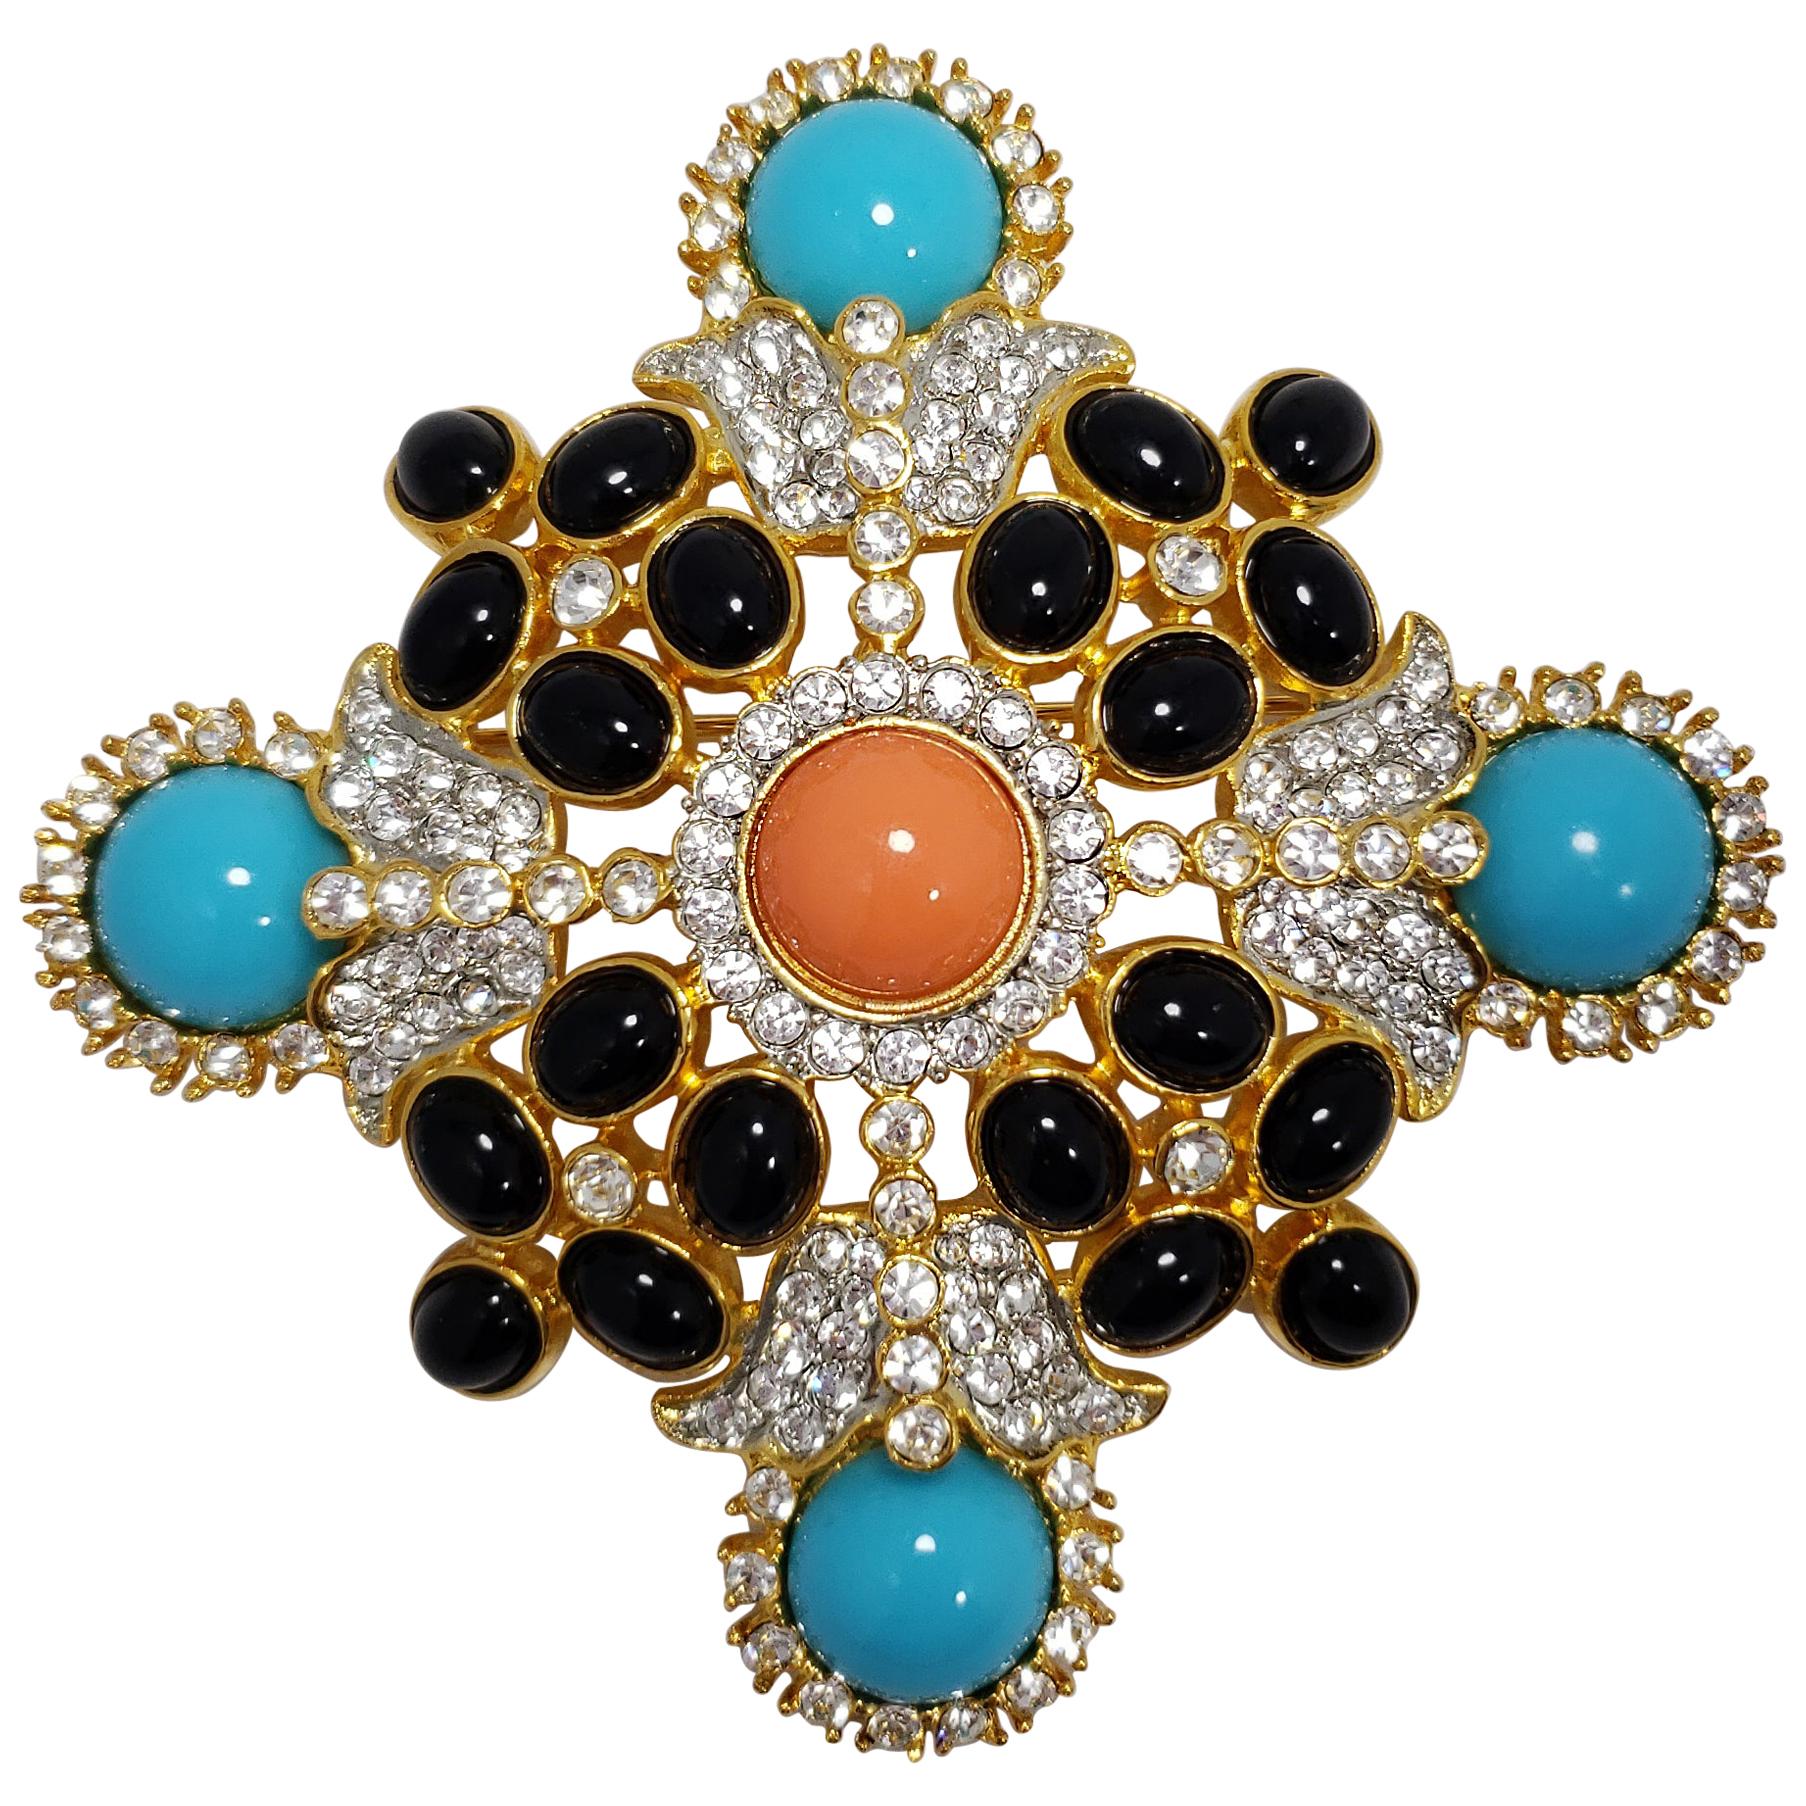 KJL Kenneth Jay Lane Pave Crystal Turquoise Coral Cabochon Pin Brooch Pendant